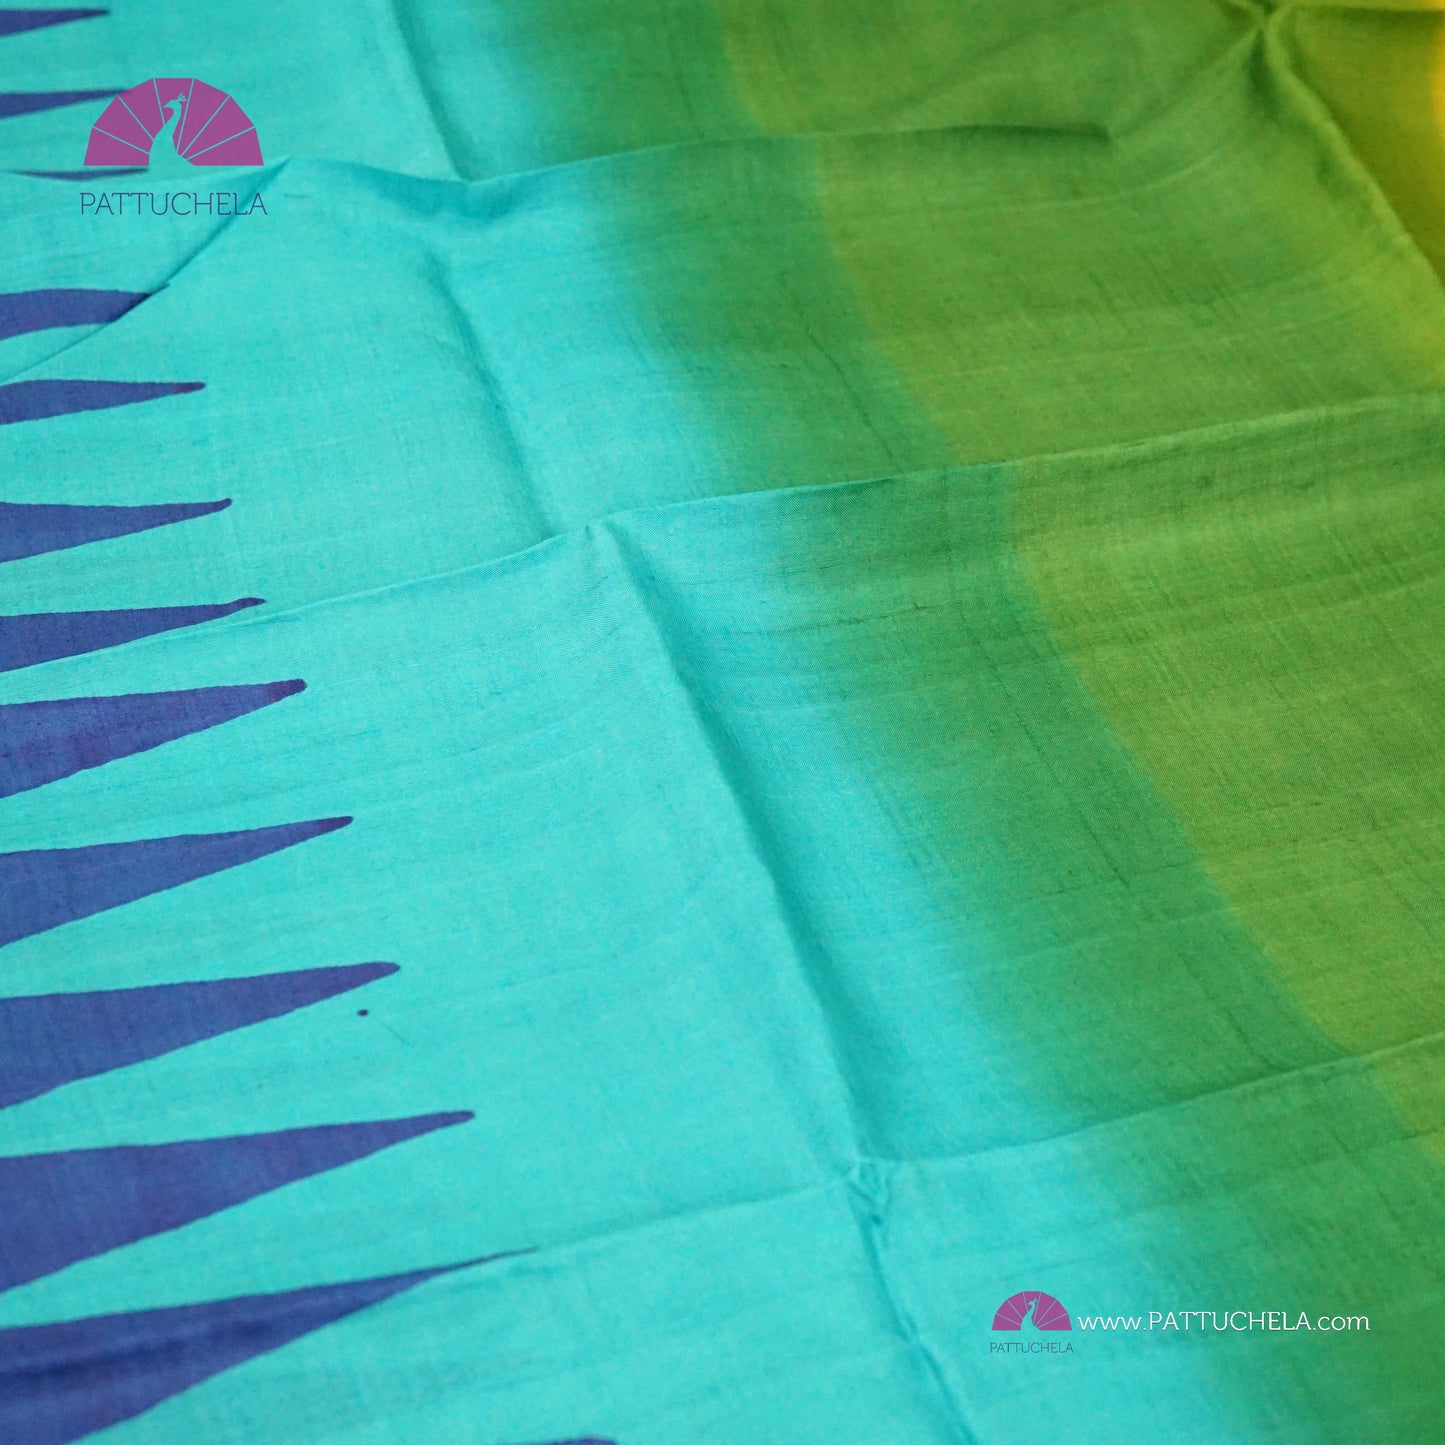 Pure Bishnupuri 3 ply Silk Saree with multiple ombre Hues